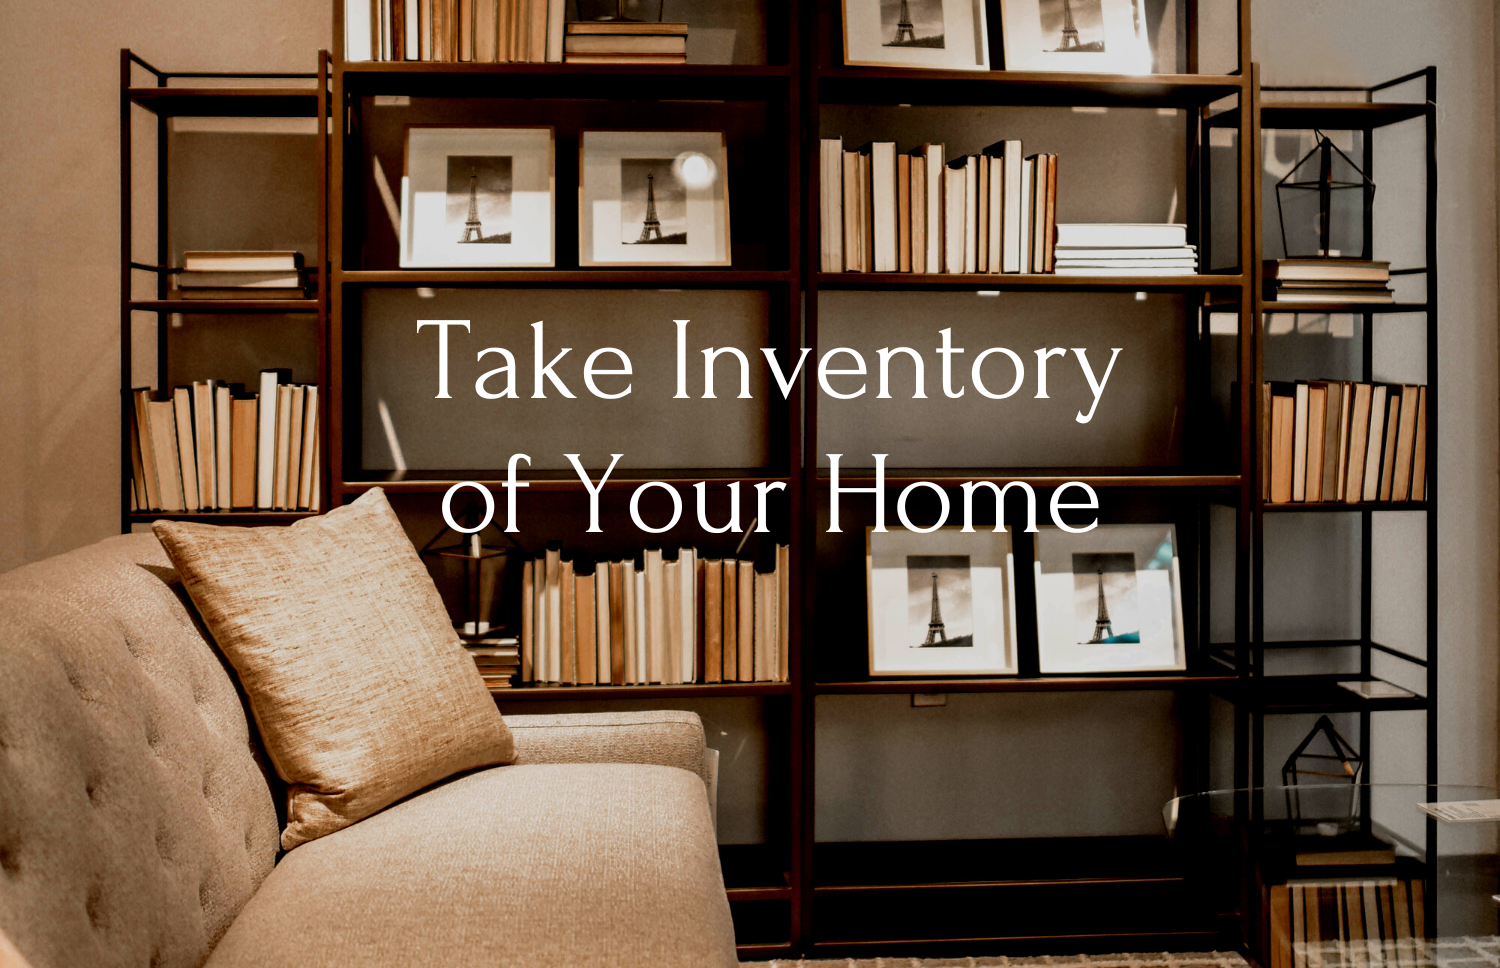 Take Inventory of Your Home